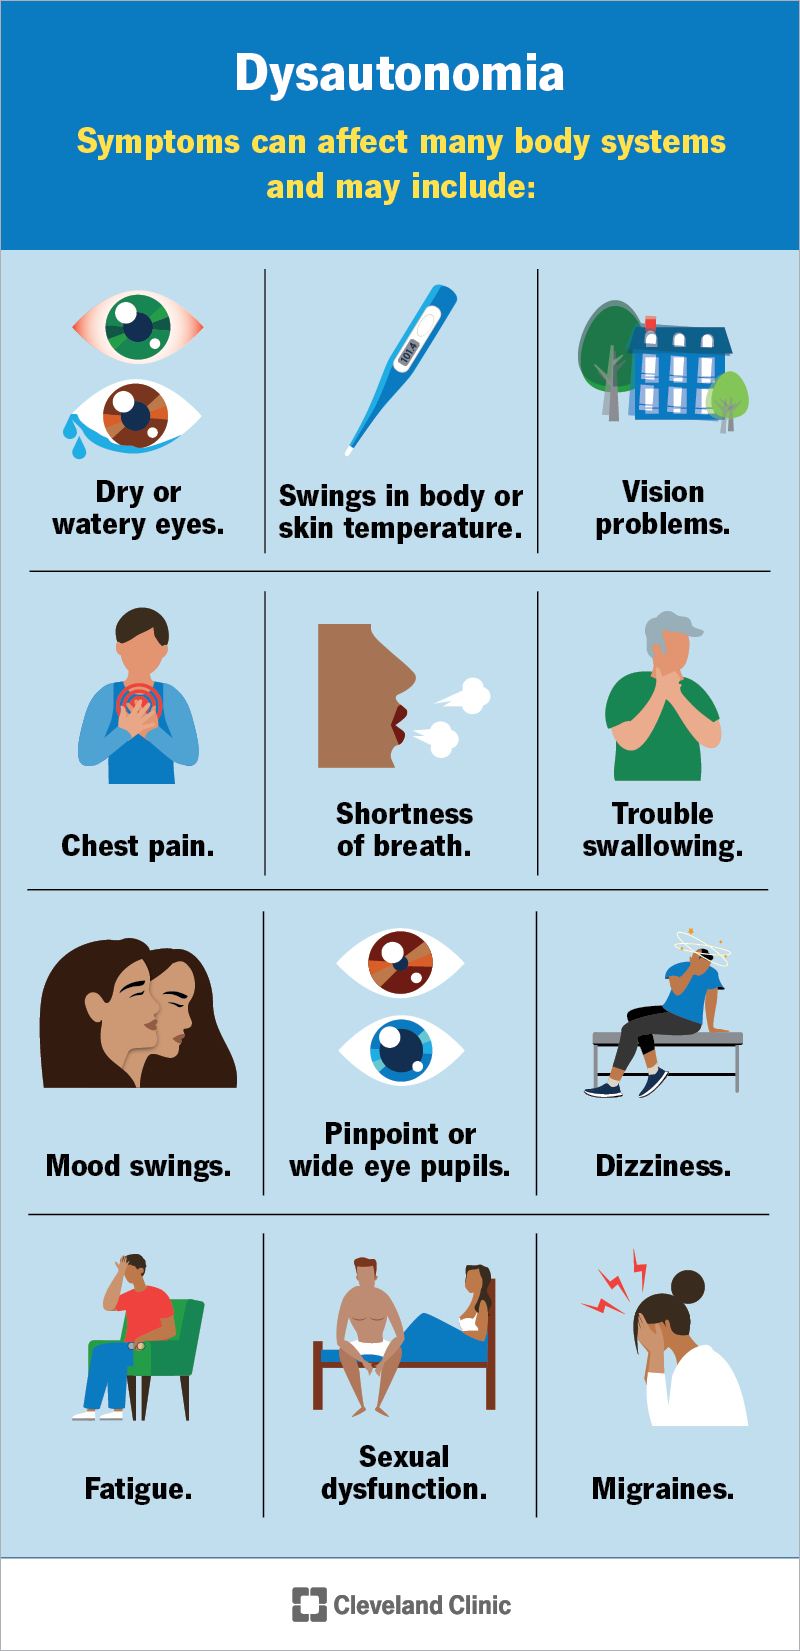 Dysautonomia symptoms can affect eyes, heart, breathing and more.